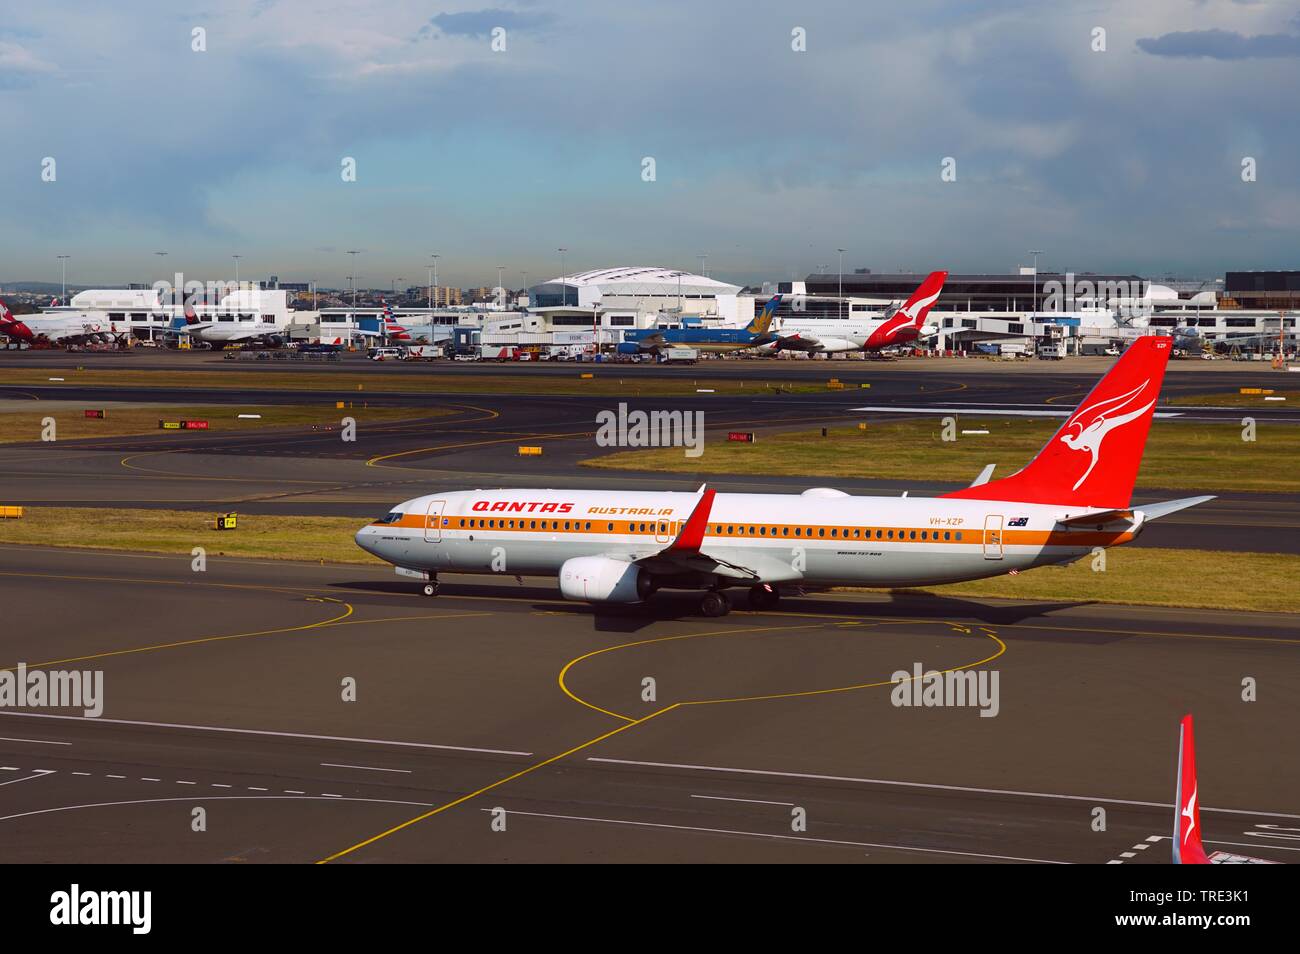 SYDNEY, AUSTRALIA -20 JUL 2018- View of a Boeing 737-800 airplane from Australian airline Qantas (QF) painted in retro livery colors at the Kingsford Stock Photo